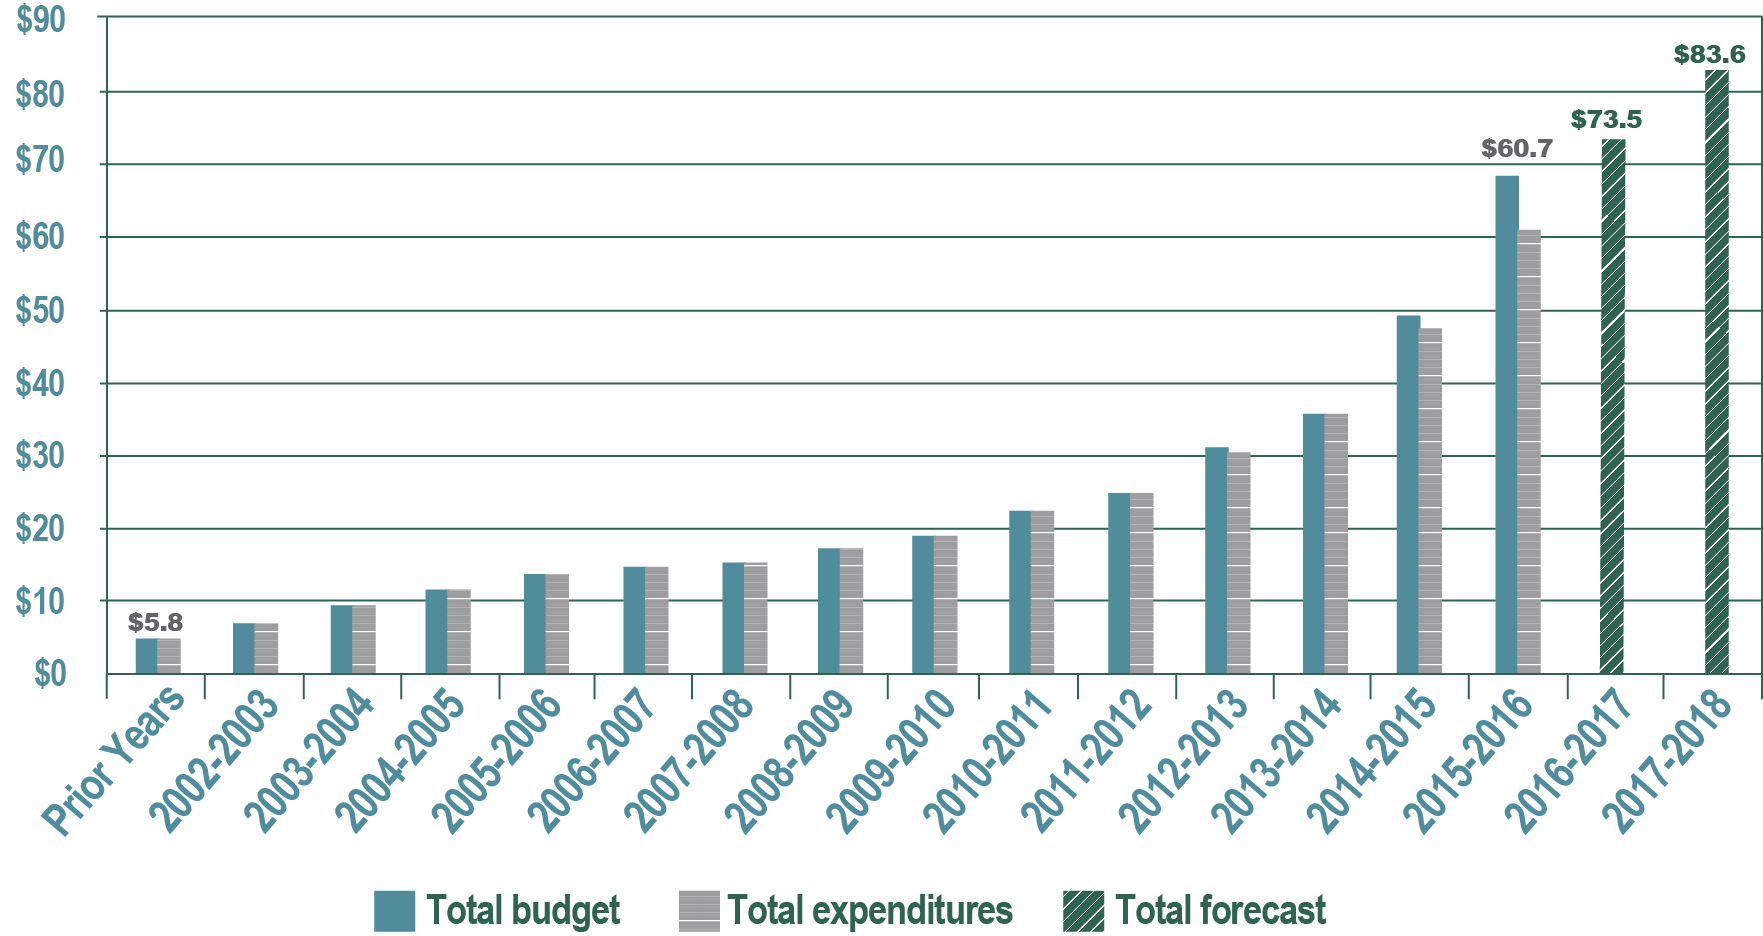 Figure 16—Long Term Vision and Plan Planning program cumulative expenditures, forecasts and budgets—Fiscal year 2015 to 2016 (in millions of dollars) - See description below.